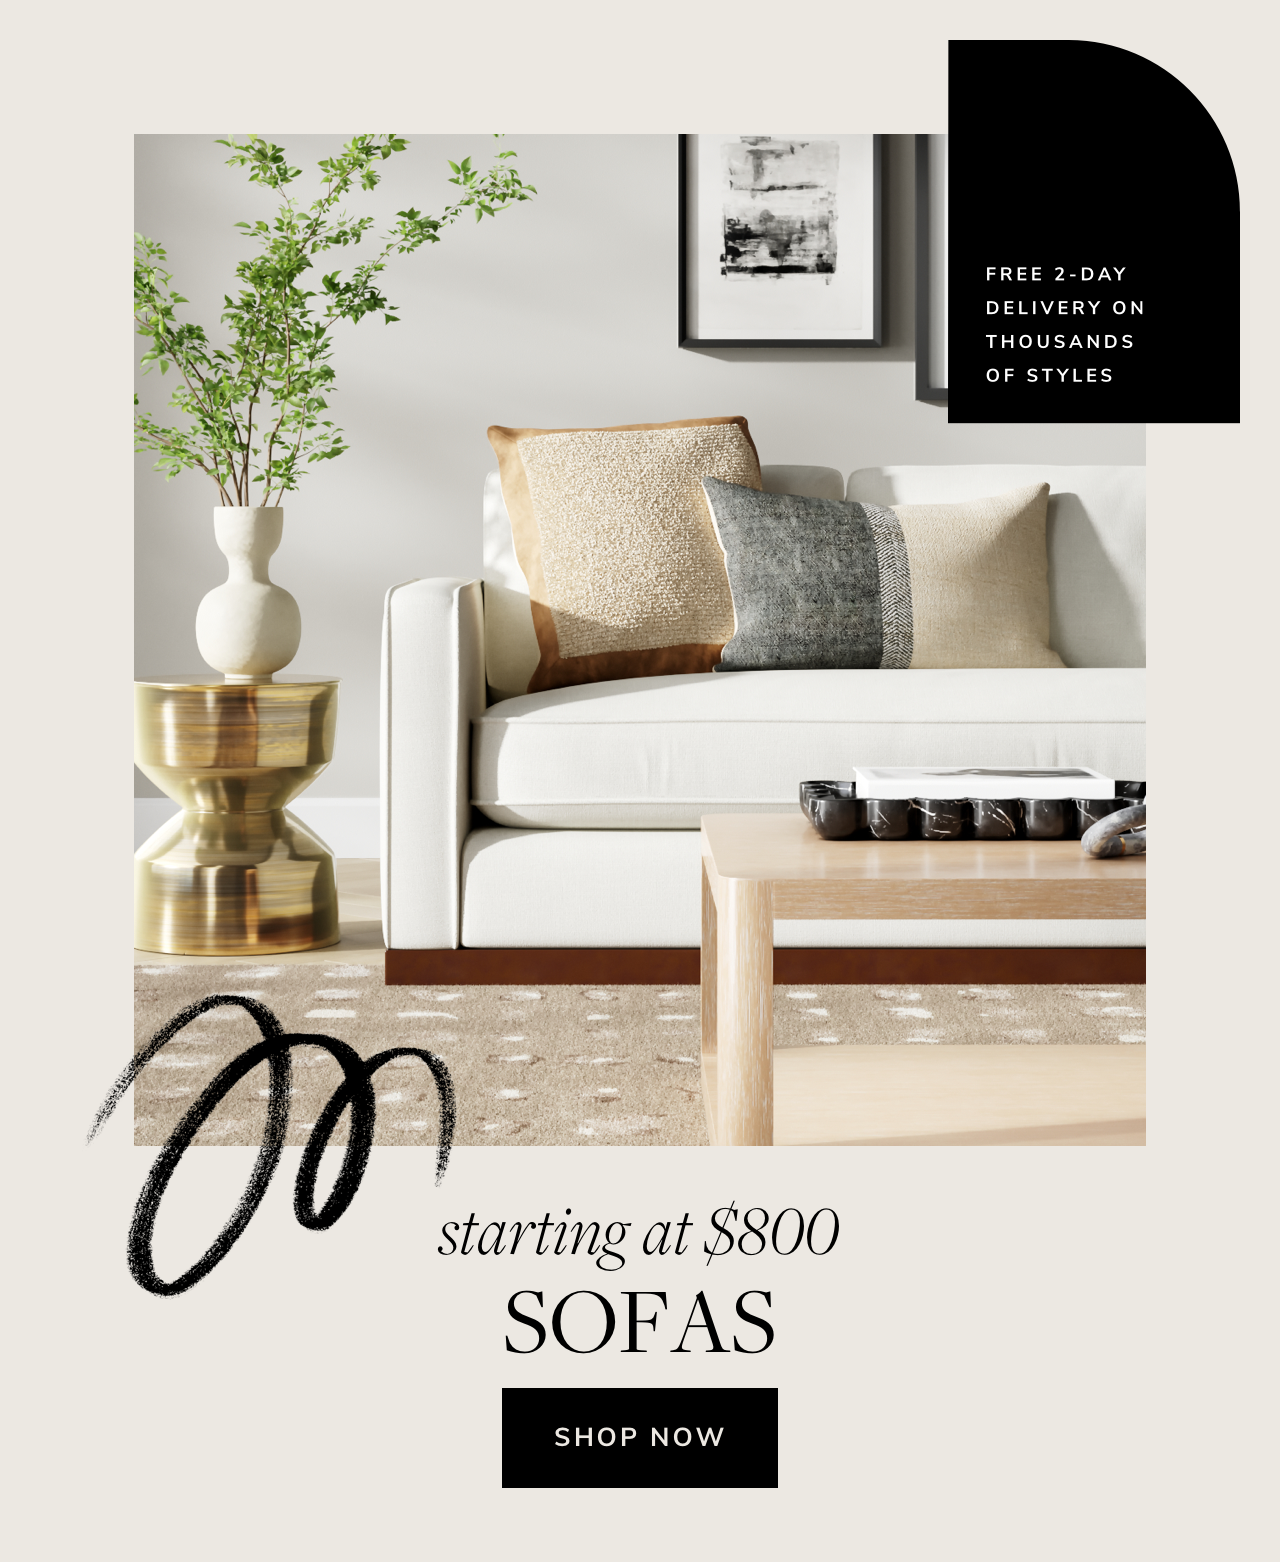 FREE 2-DAY DELIVERY ON THOUSANDS OF STYLES mm'ng at $800 SOFAS SHOP NOW 